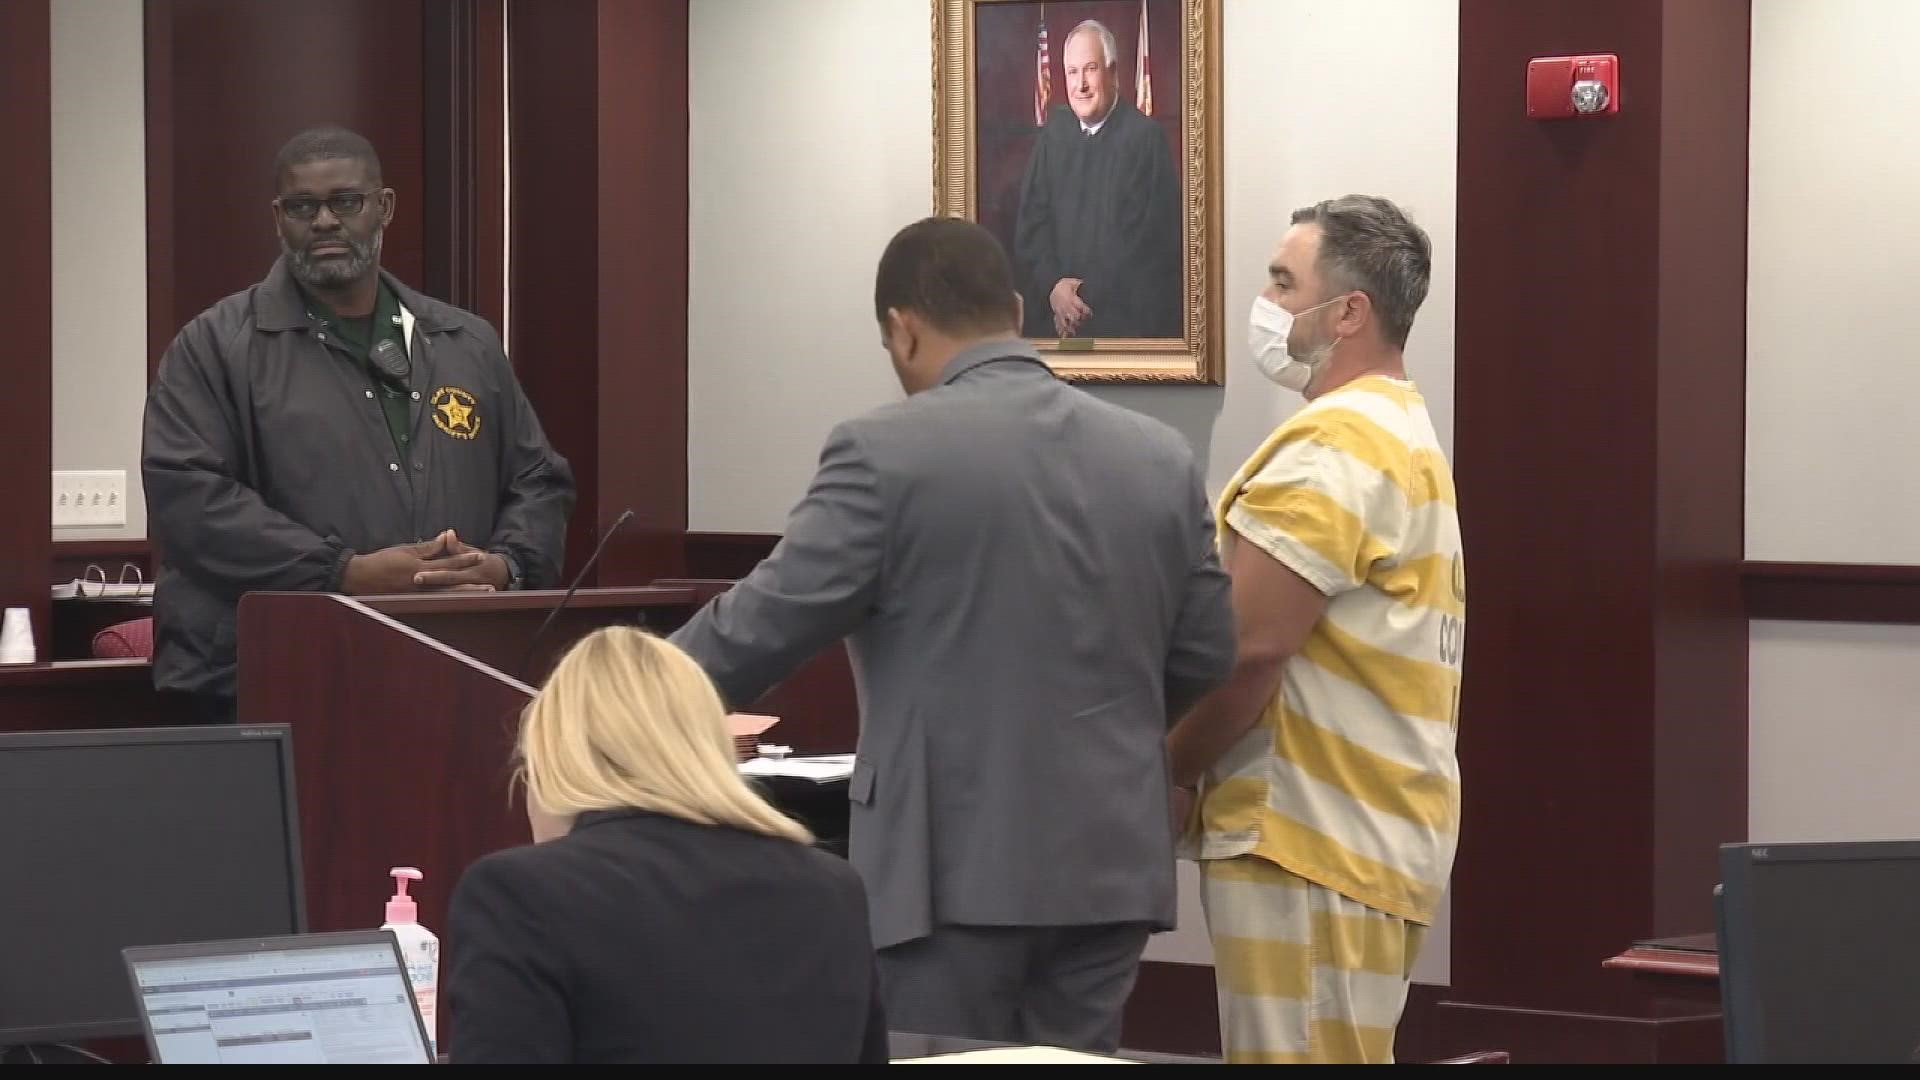 Clifford Ringer's bond was previously revoked when a judge said he is "a danger to the community." Days after the victim in the crash died, he's been granted bond.